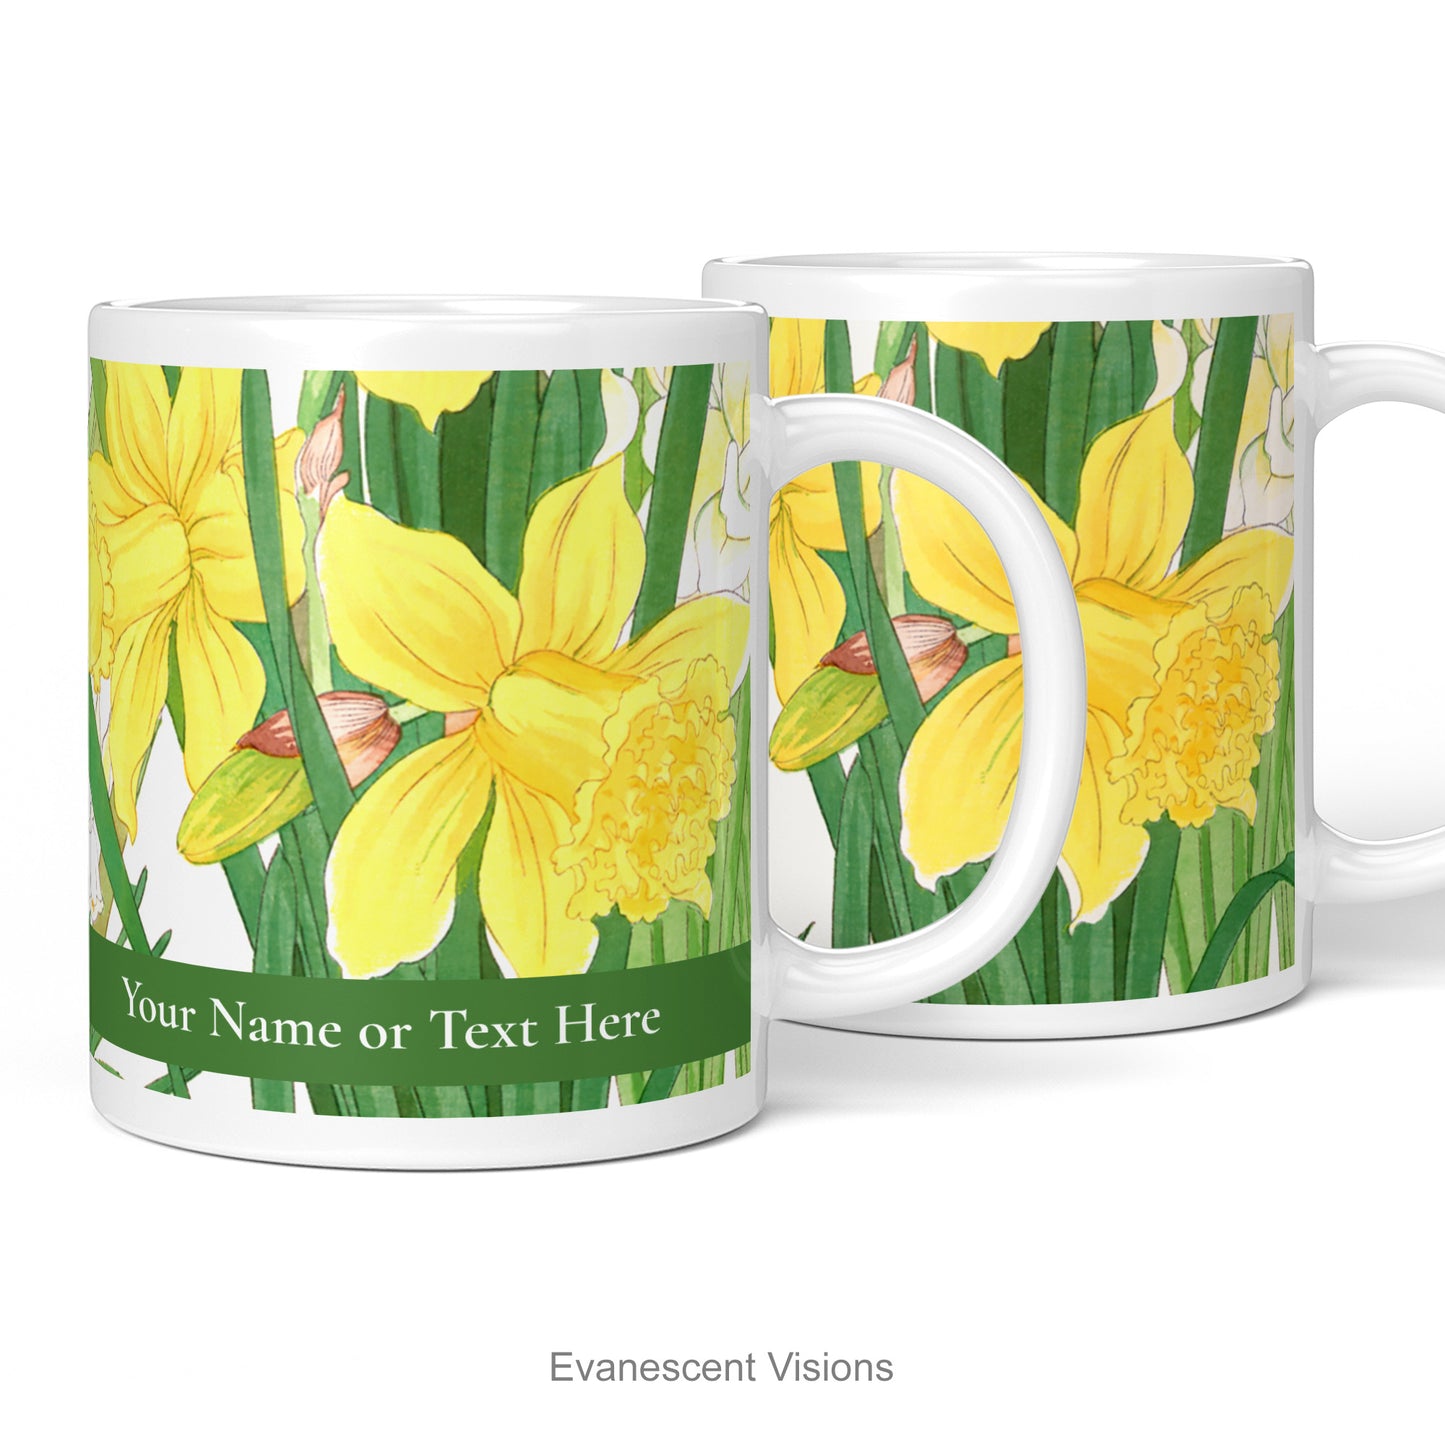 Personalised mug with design from a woodblock painting of Spring Daffodil Flowers by artist Kônan Tanigami (1917-1924)